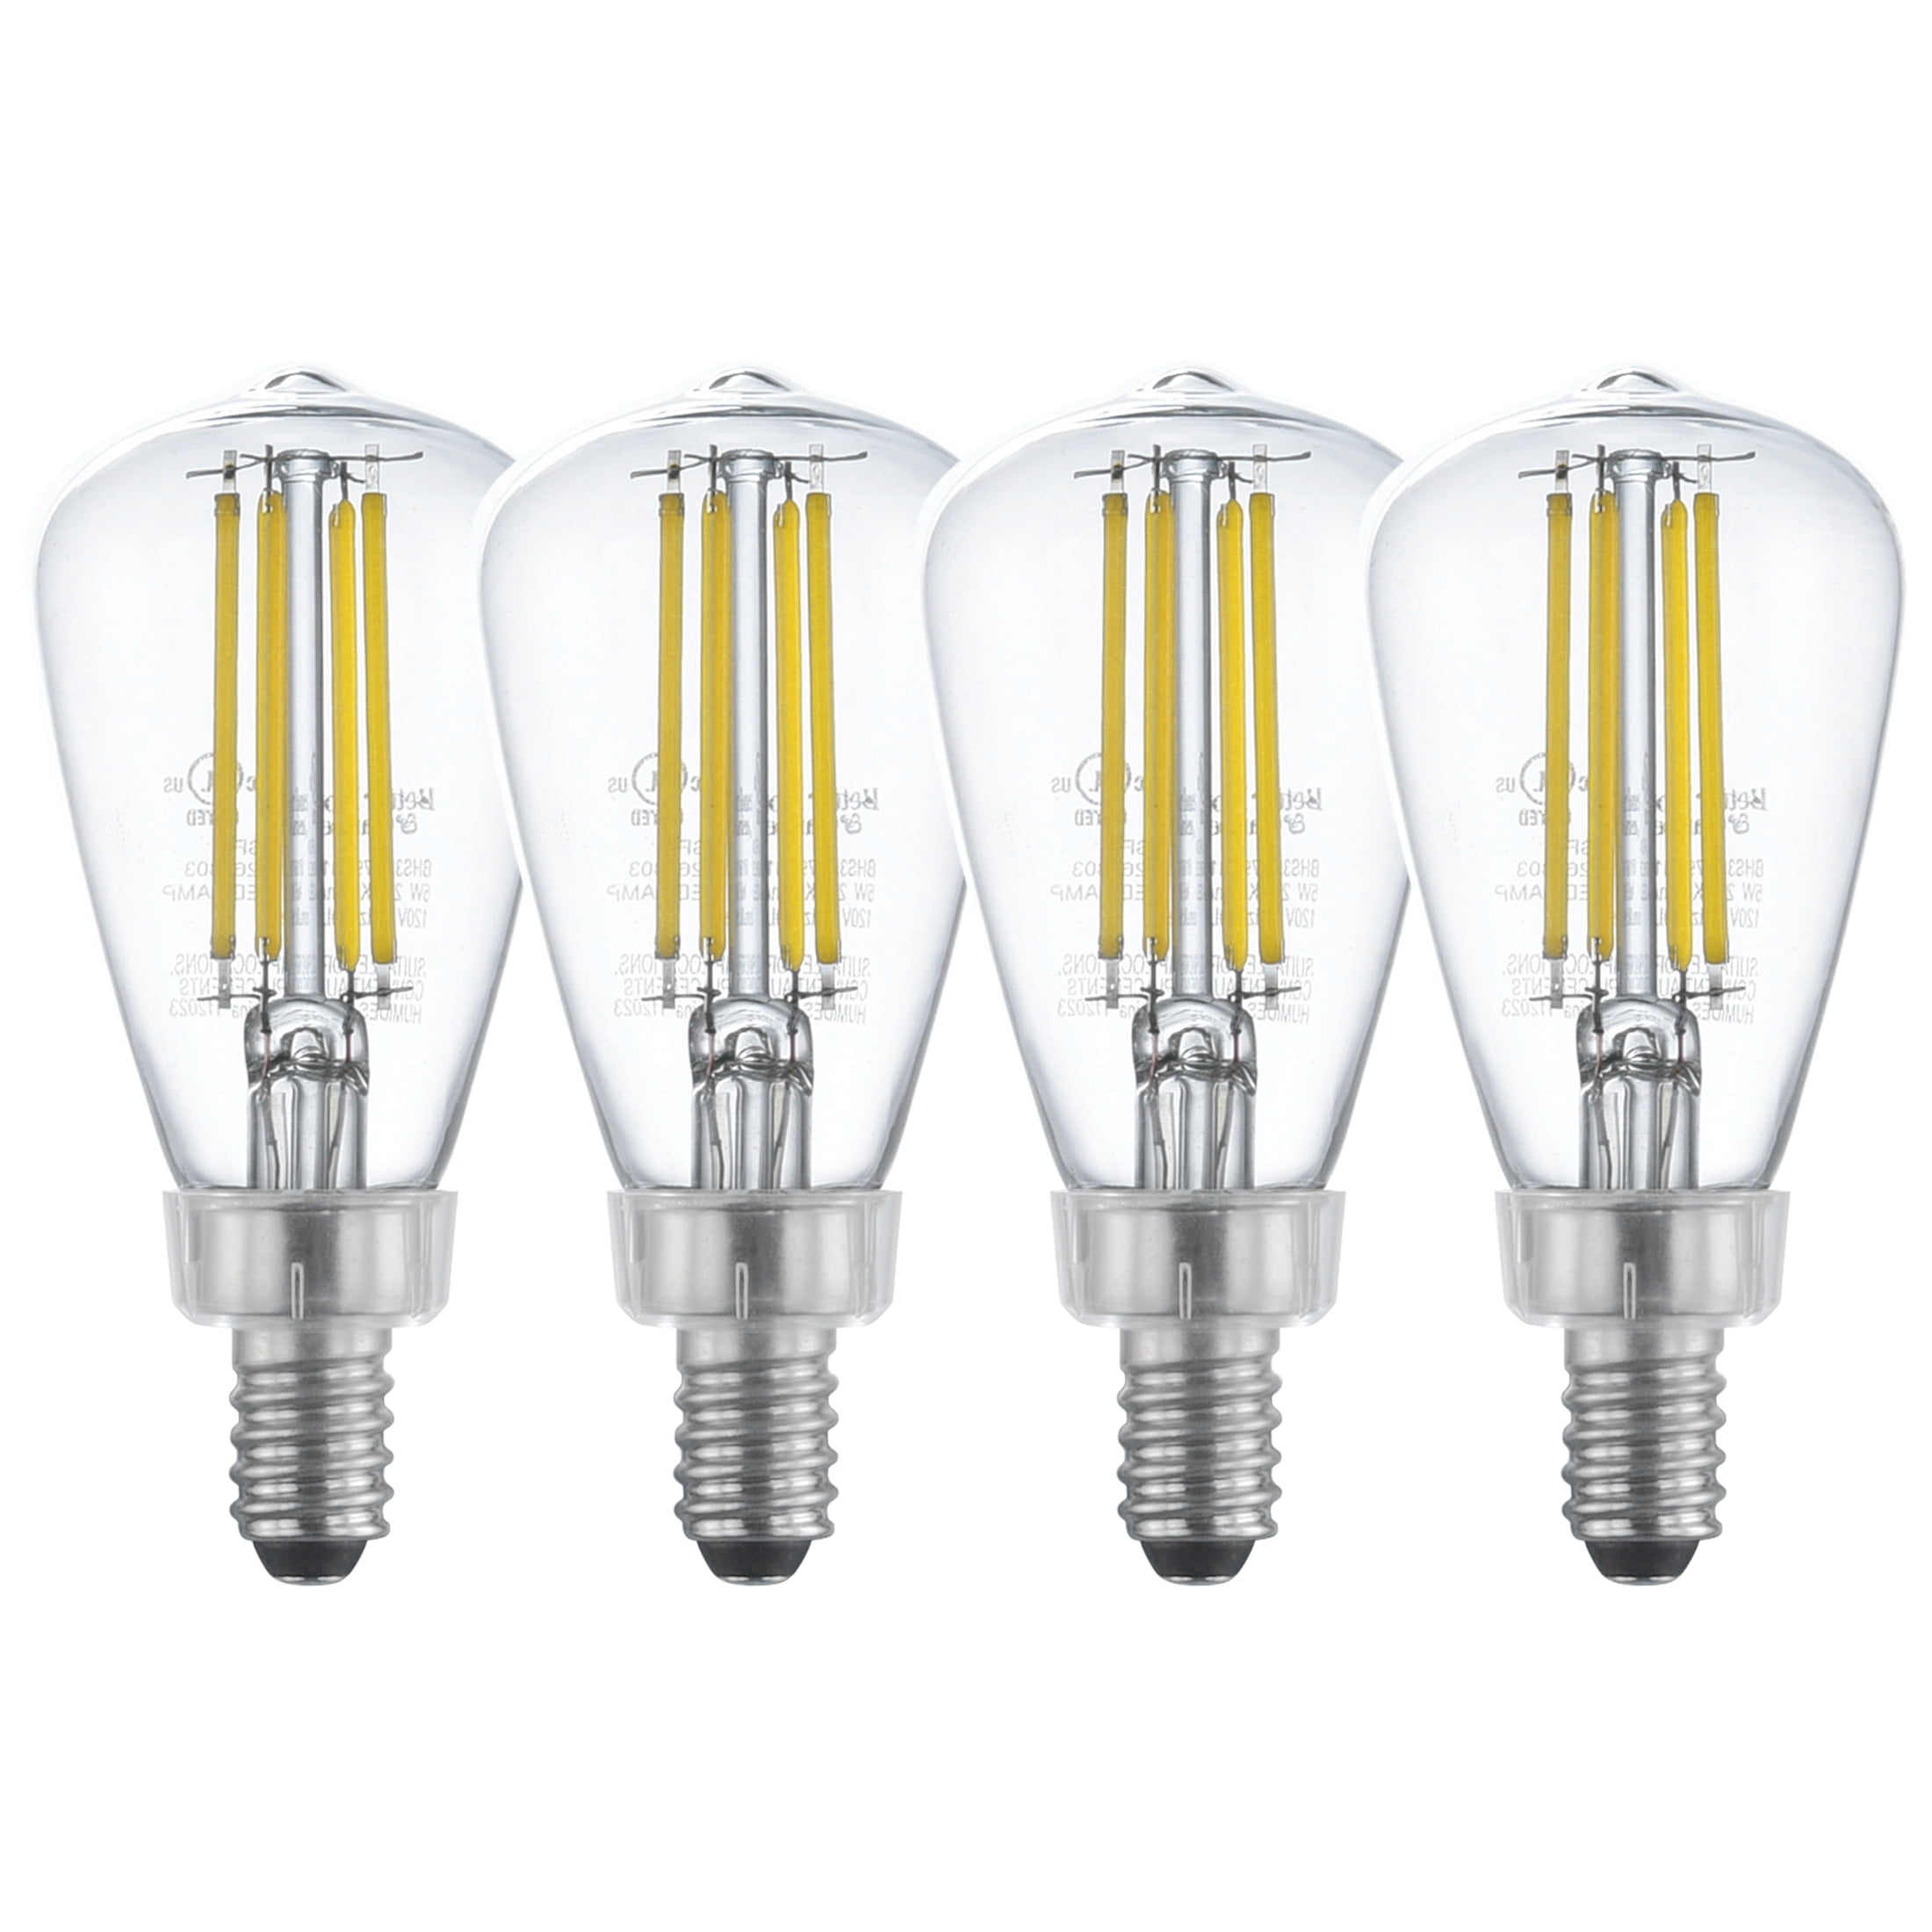 Better Homes & Gardens ST12 LED Light Bulb, 4.5-Watt (60W Equiv.) Daylight Dimmable E12 Base, 4 pack at Walmart for $2.79 free ship with Walmart+ and YMMV on store pickup